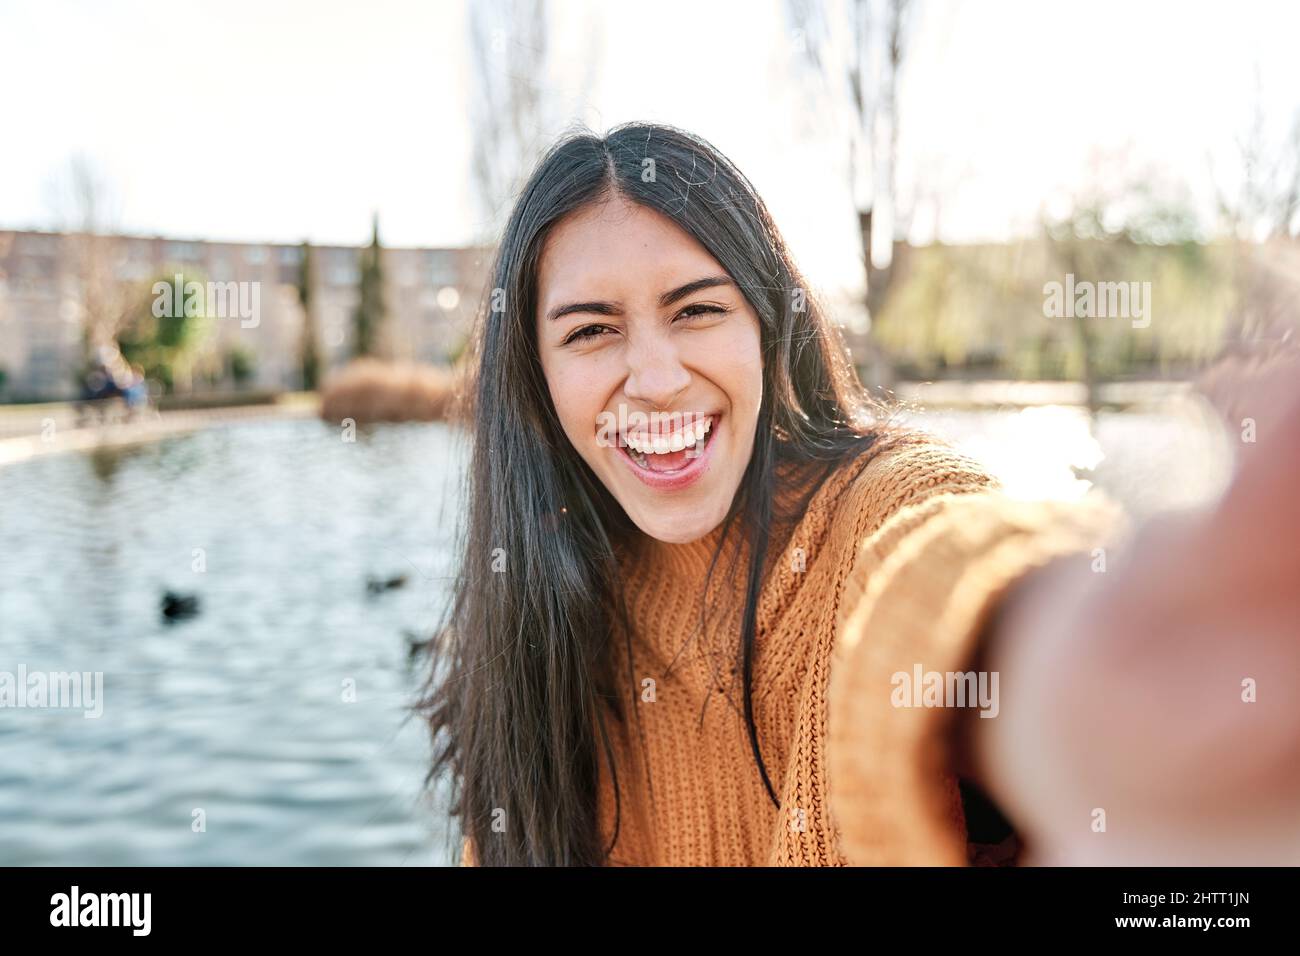 Portrait of charming young woman smiling while taking selfie photo. Stock Photo